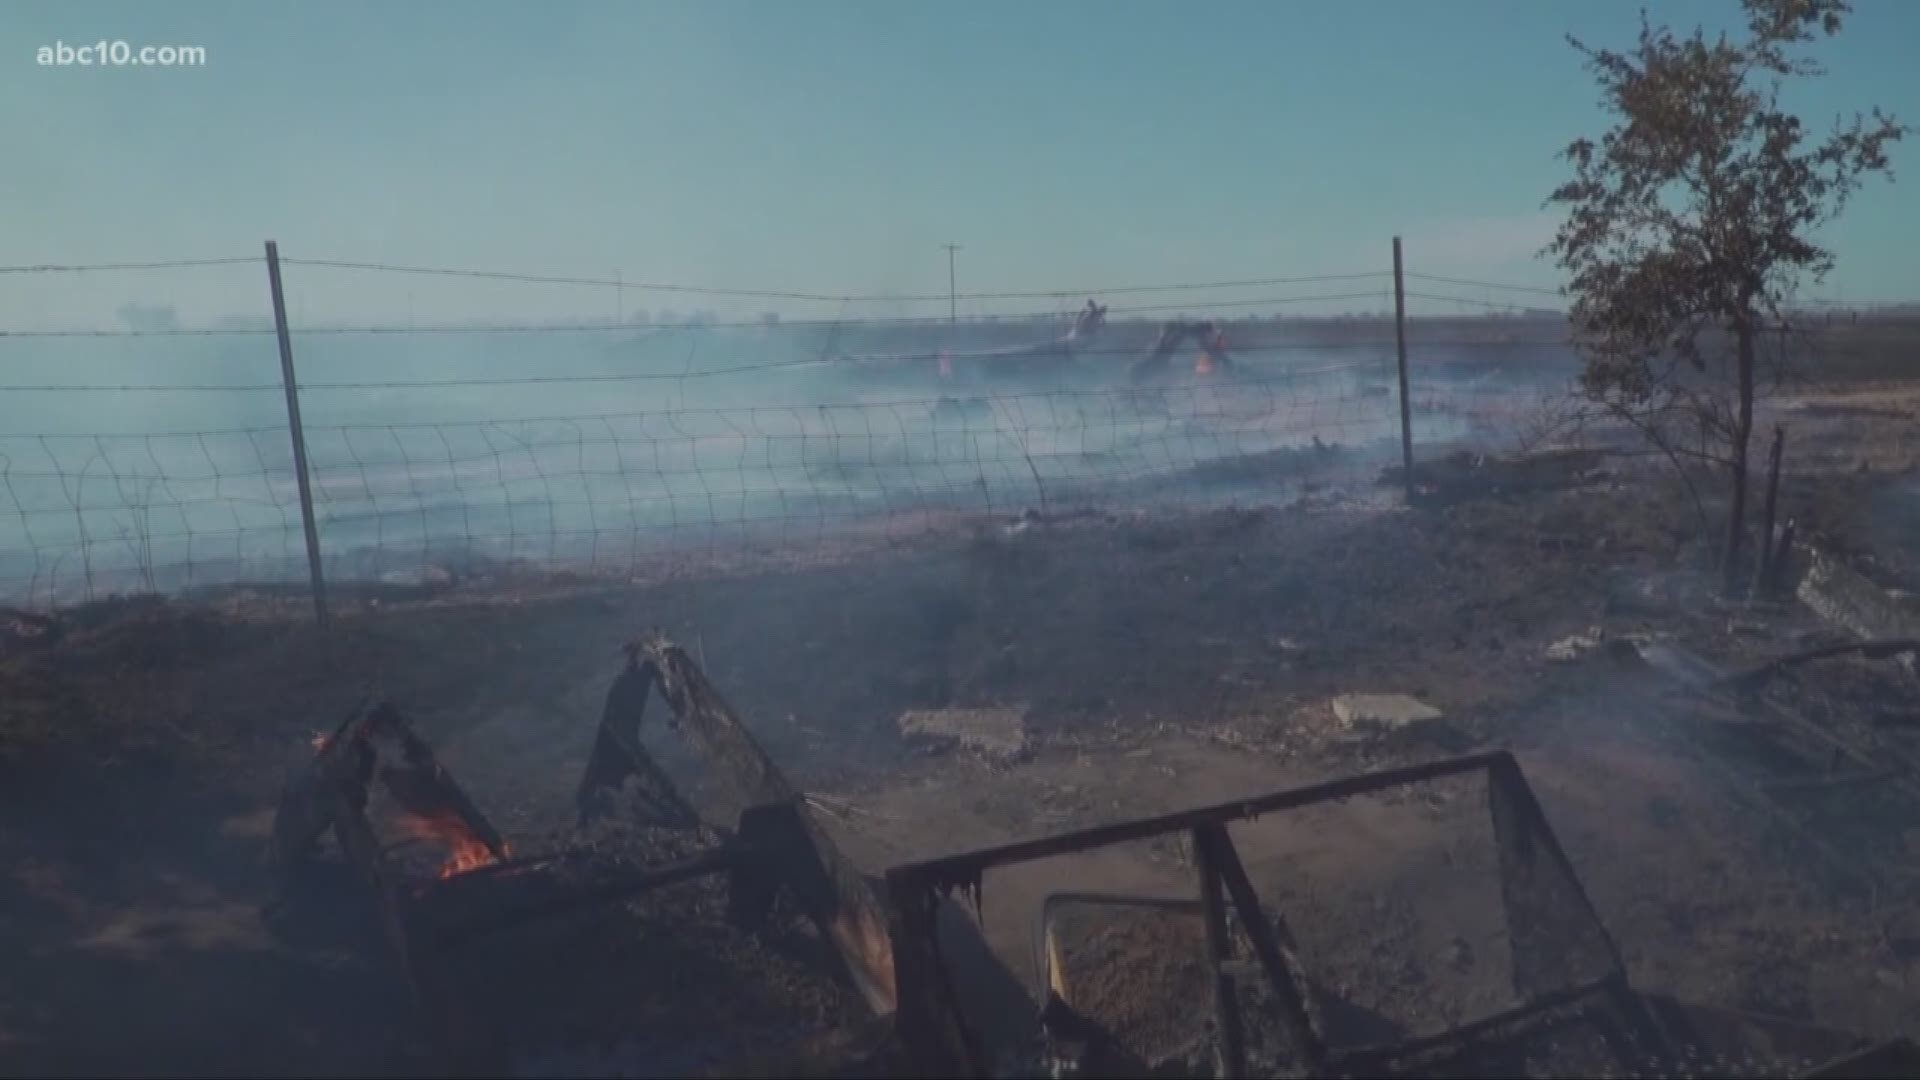 "The fire made it just 10 feet outside our backdoor."